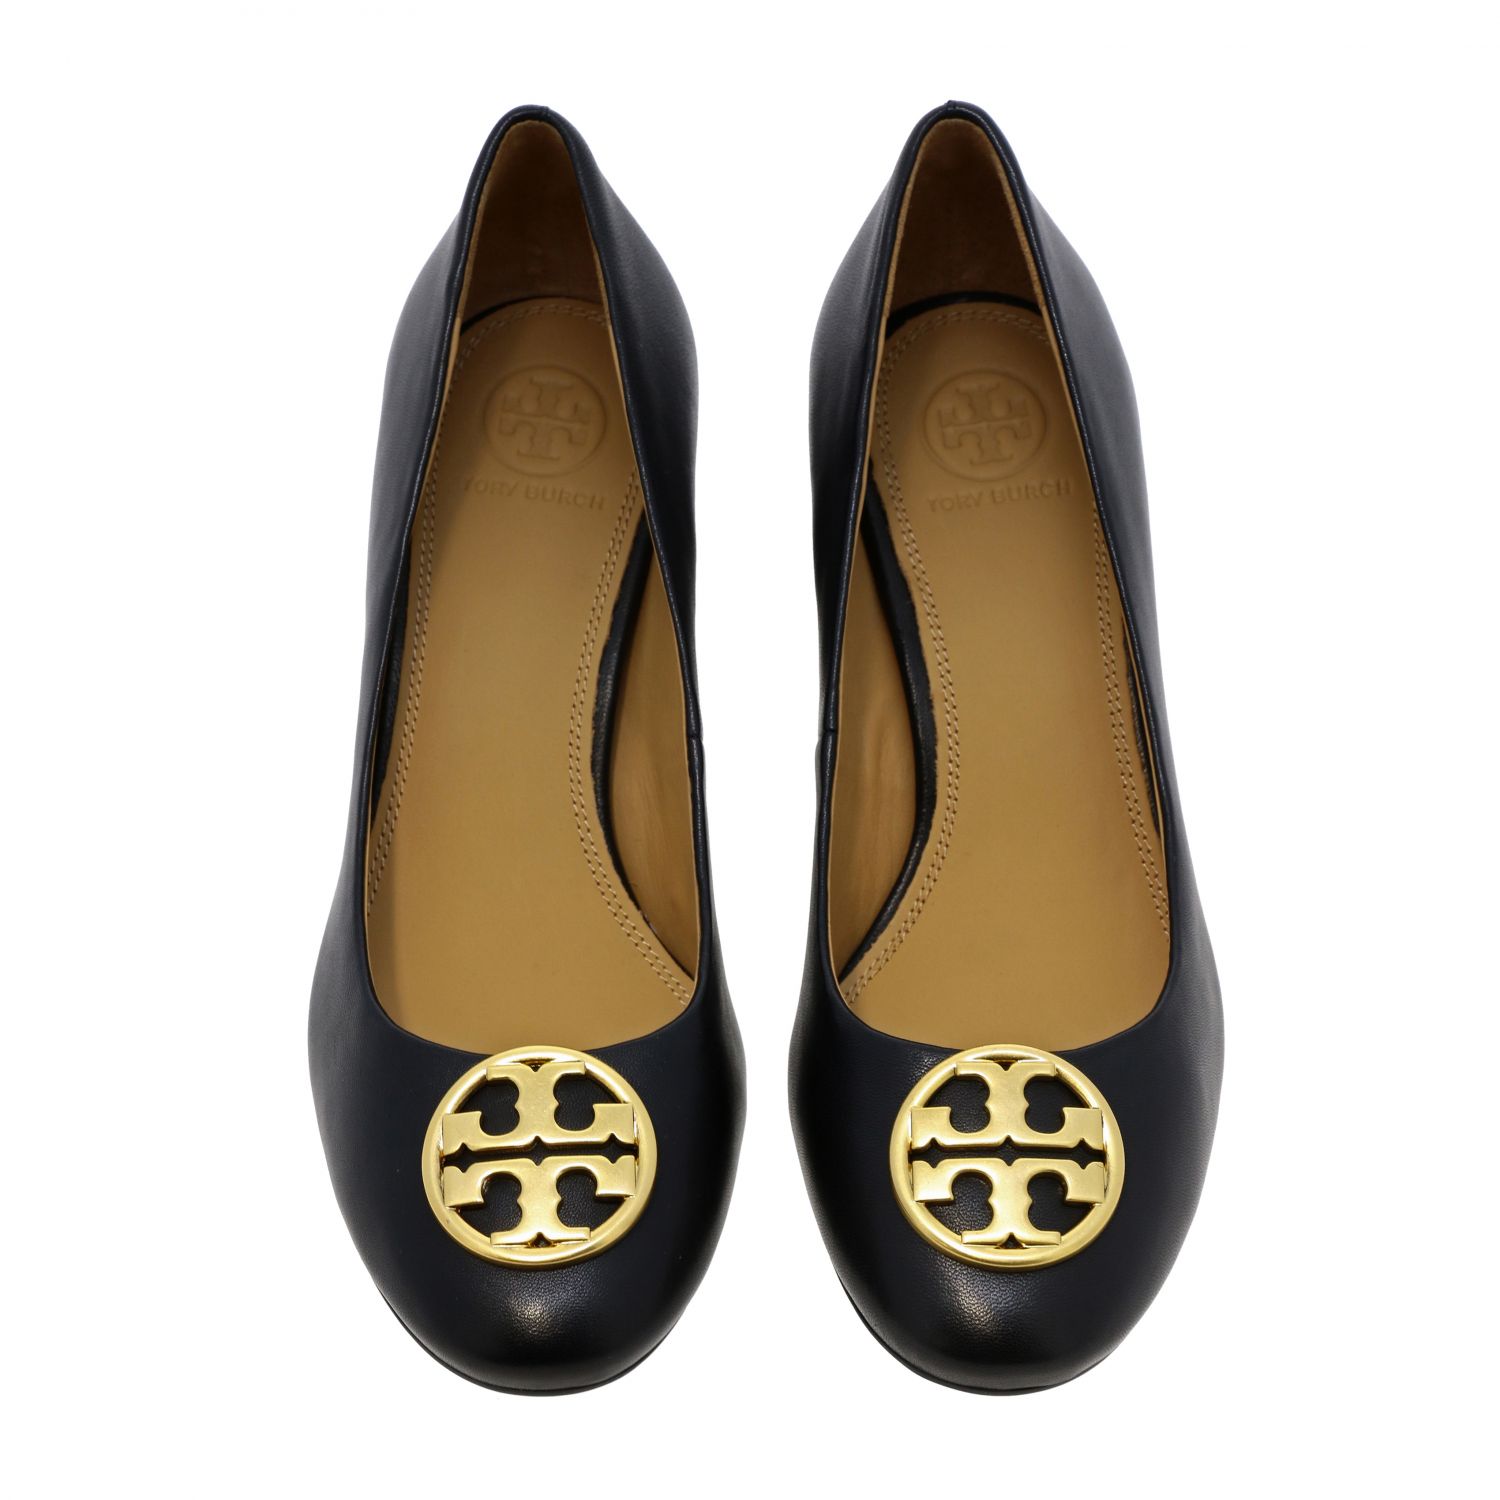 TORY BURCH: pumps for woman - Black | Tory Burch pumps 45900 online on ...